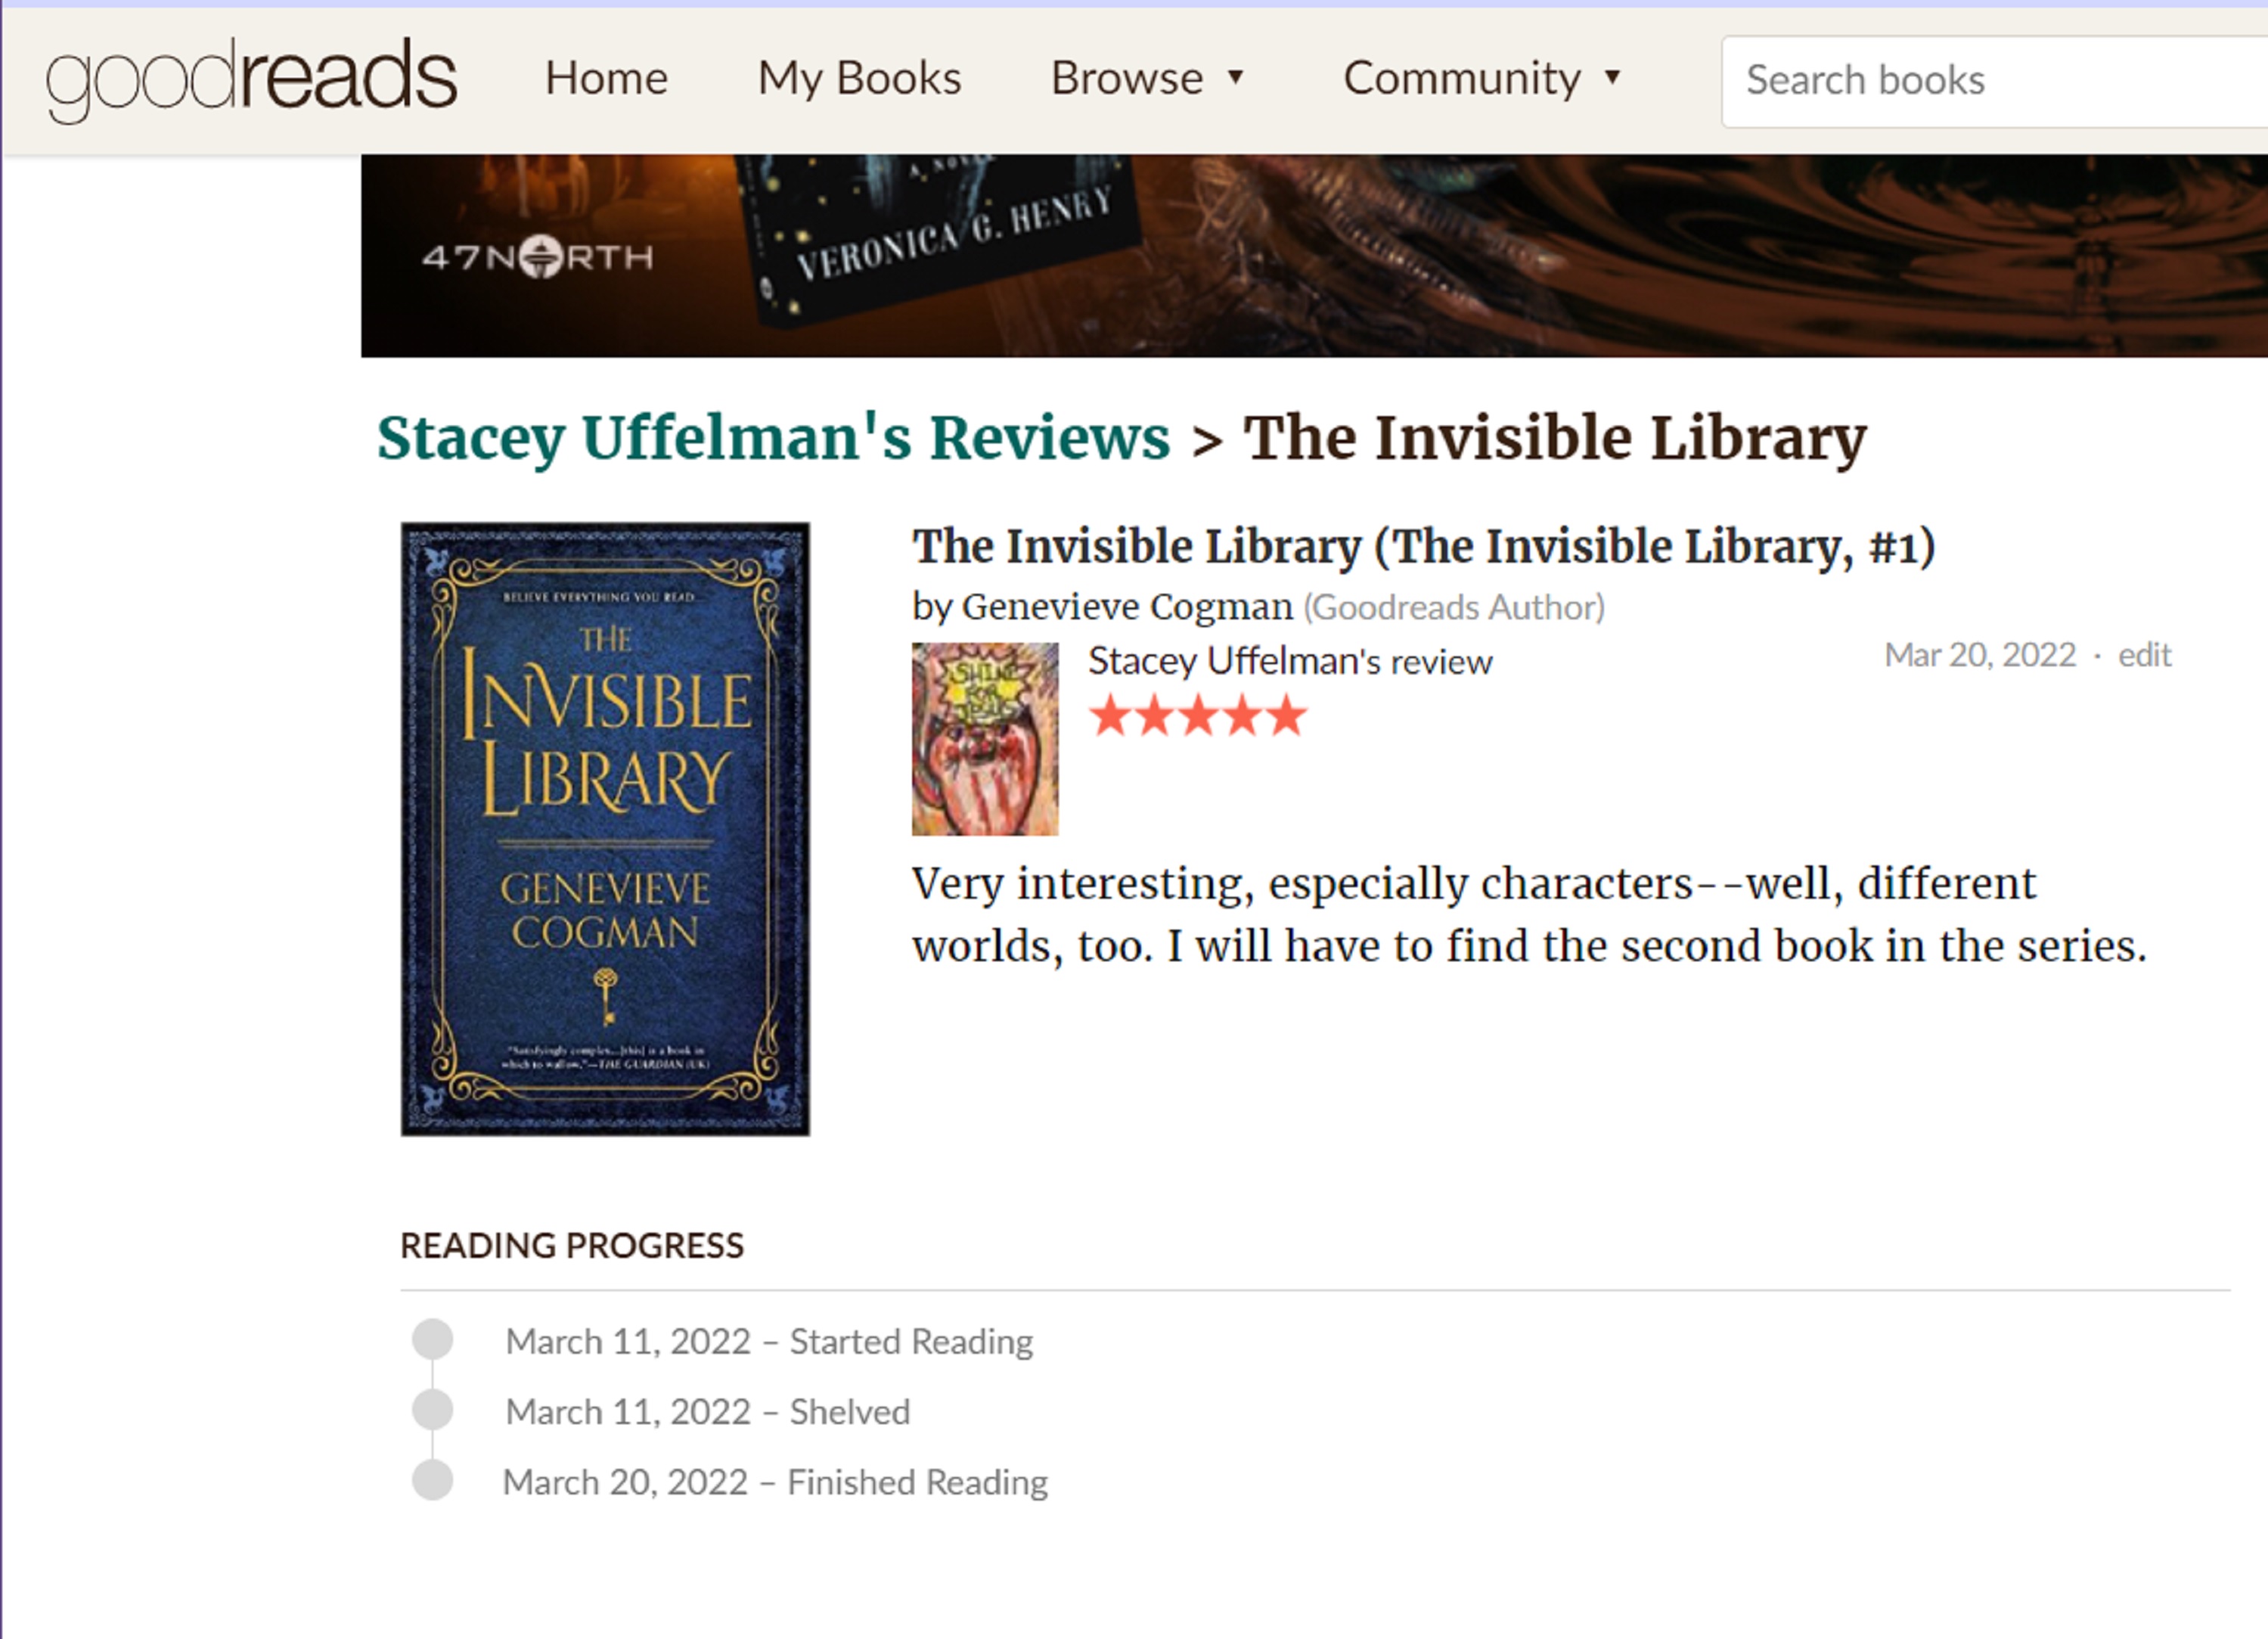 Screencap of GoodReads page showing book I just finished